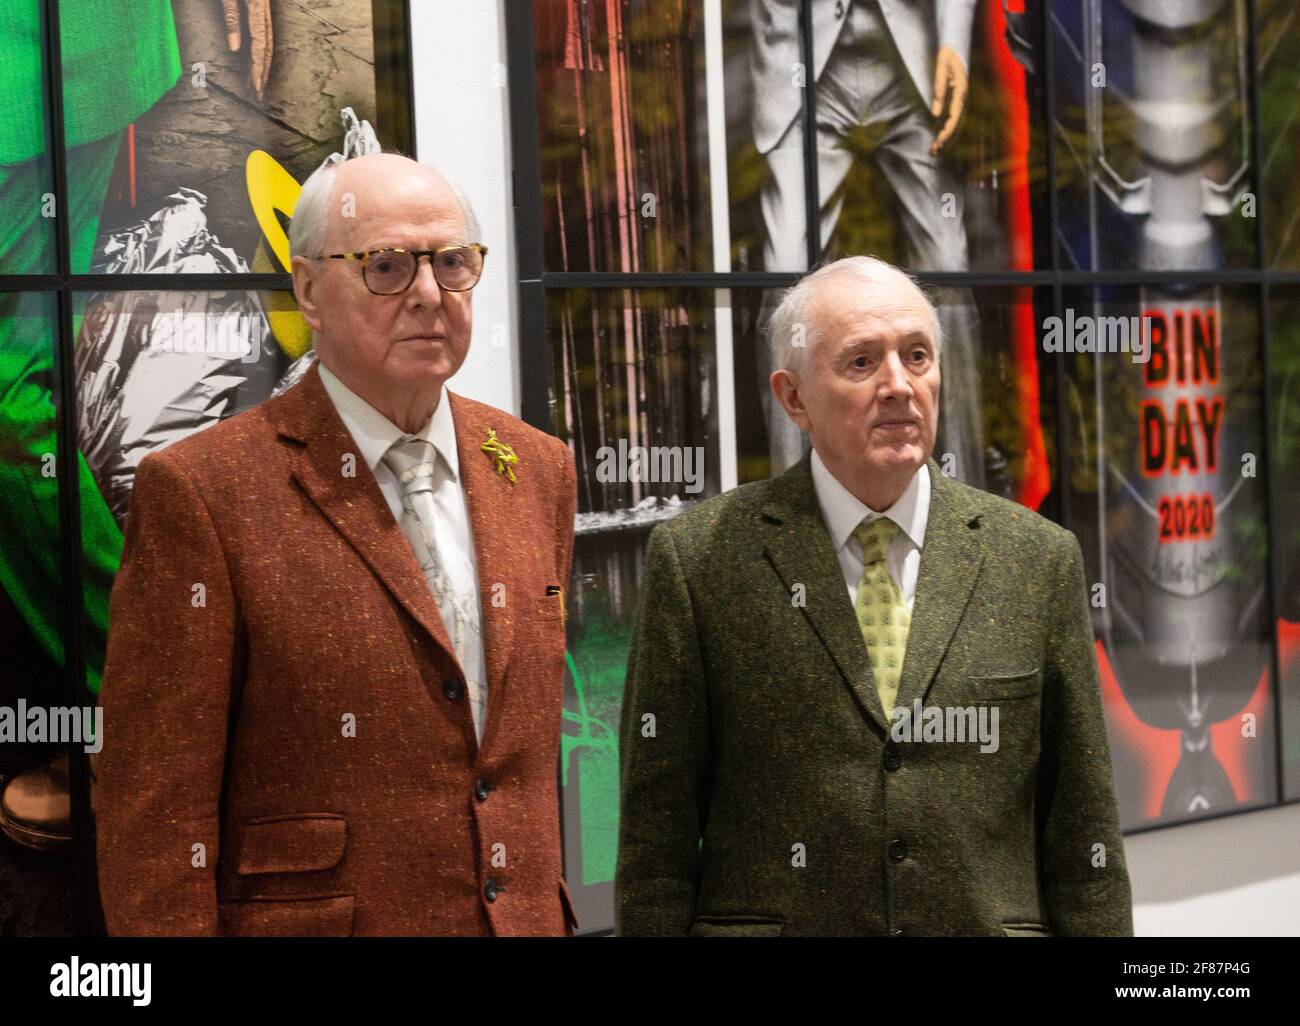 London, UK. 12th Apr, 2021. ‘NEW NORMAL PICTURES', a solo exhibition by Gilbert & George bringing together 26 new pictures described by the artists as ‘celebratory, crazed and super-modern'. Continuing their ‘Pilgrim's Progress' through east London, the artists capture the mood of the moment and appear as zonked figures amongst disorientating cityscapes. Credit: Mark Thomas/Alamy Live News Stock Photo